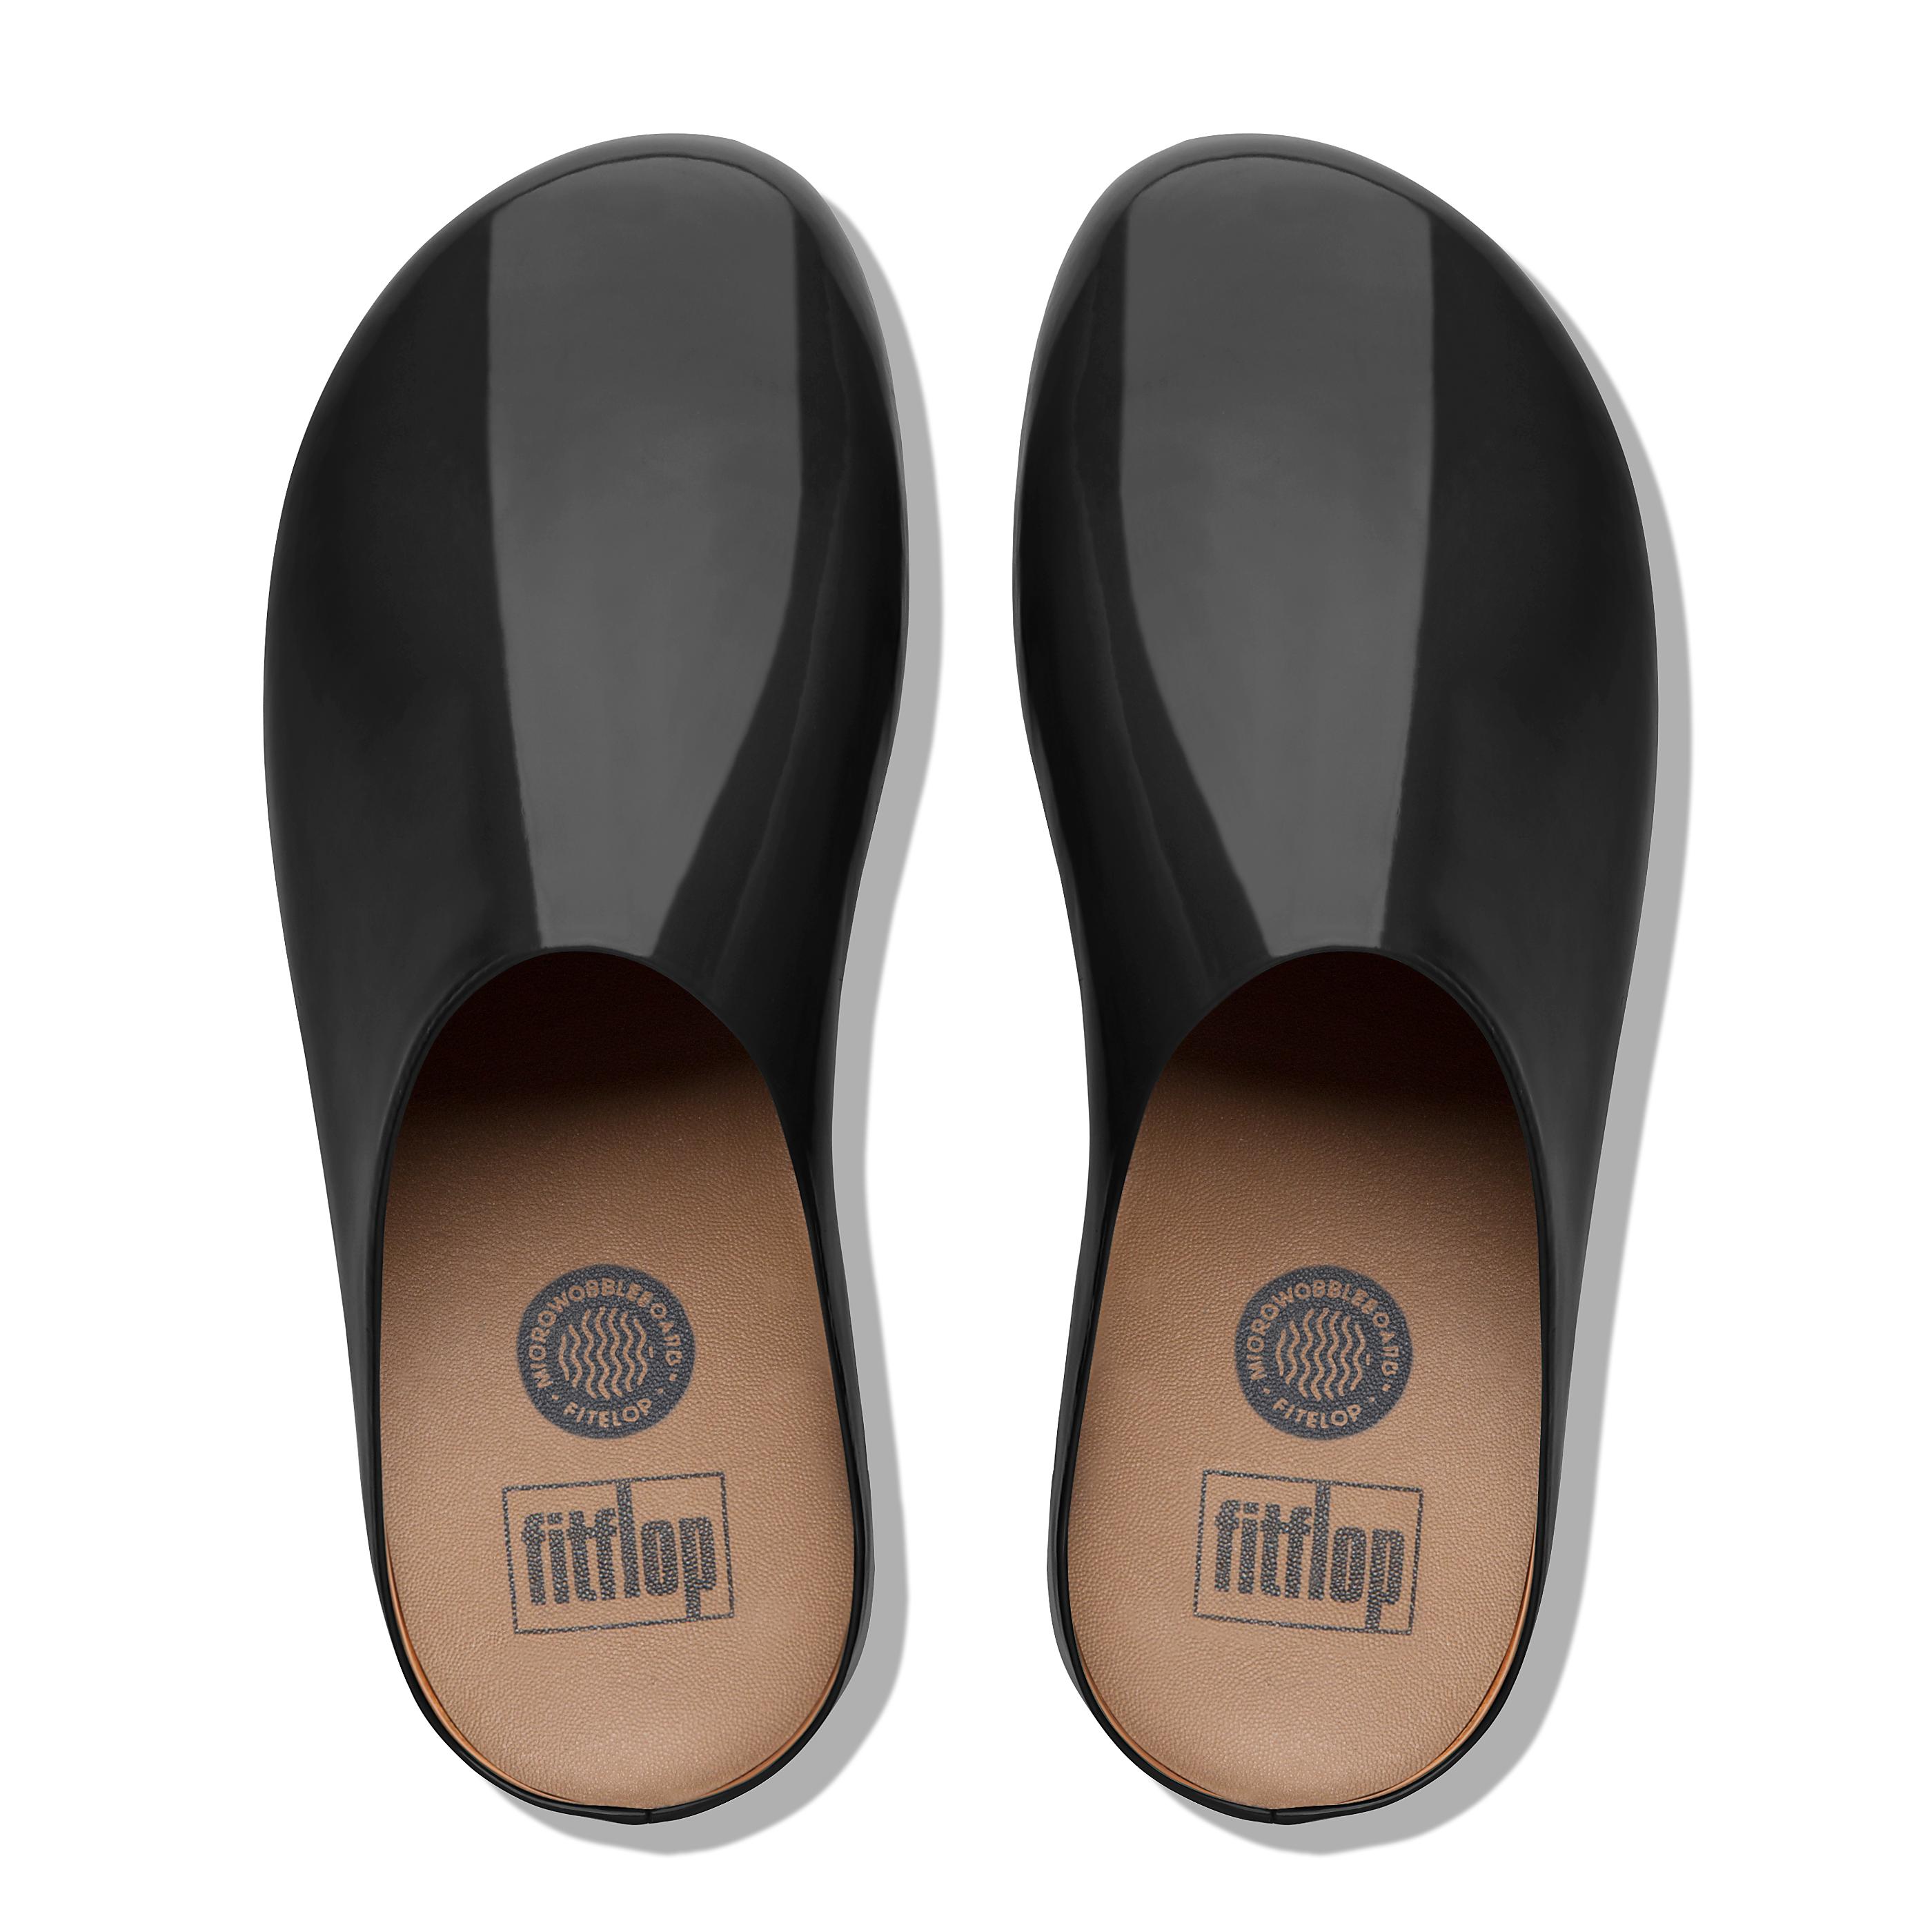 fitflop shuv patent clogs